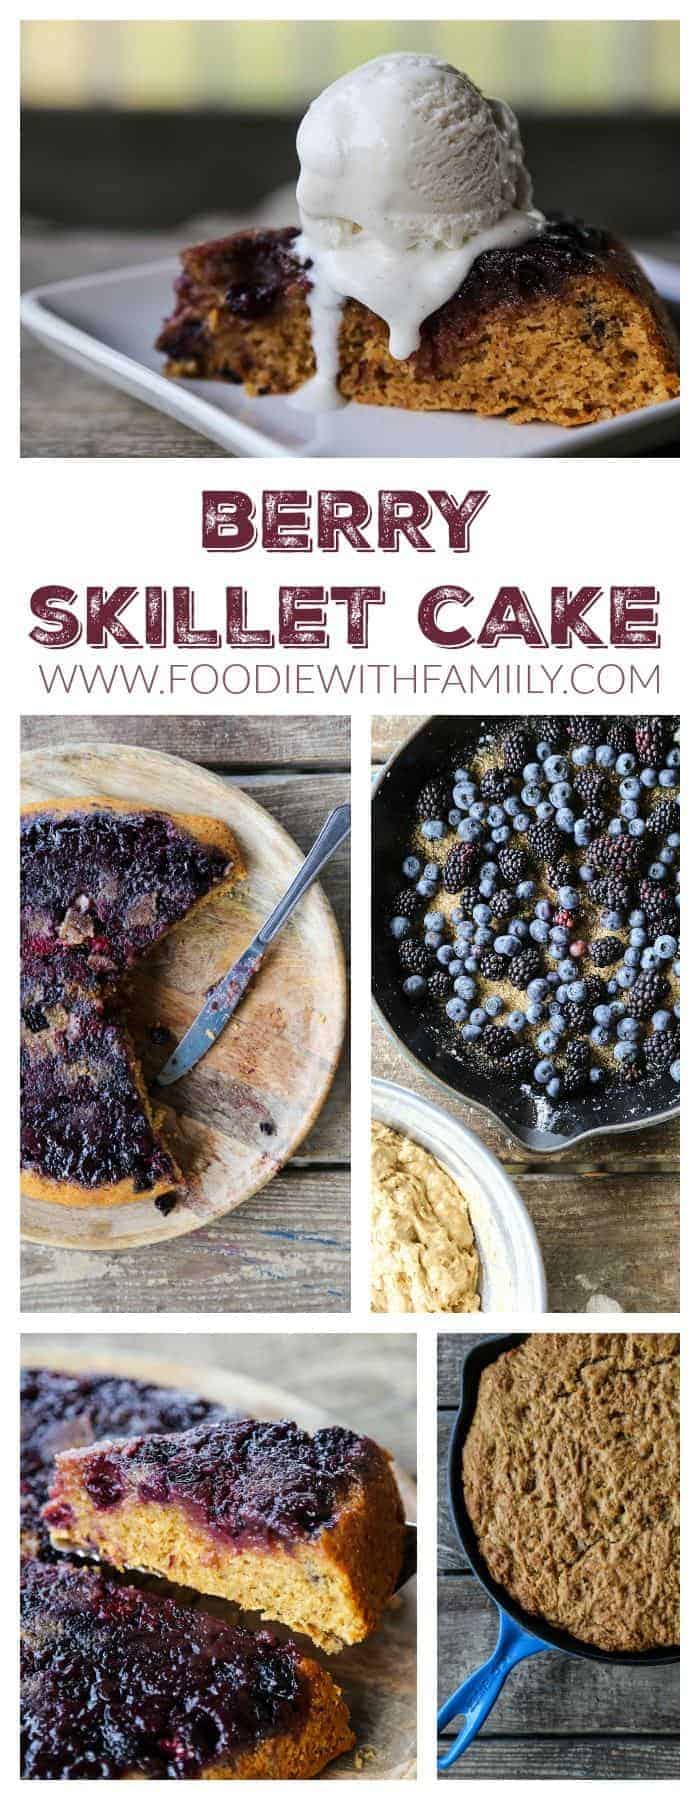 Summer Berry Skillet Cake, easy, gorgeous, delicious...